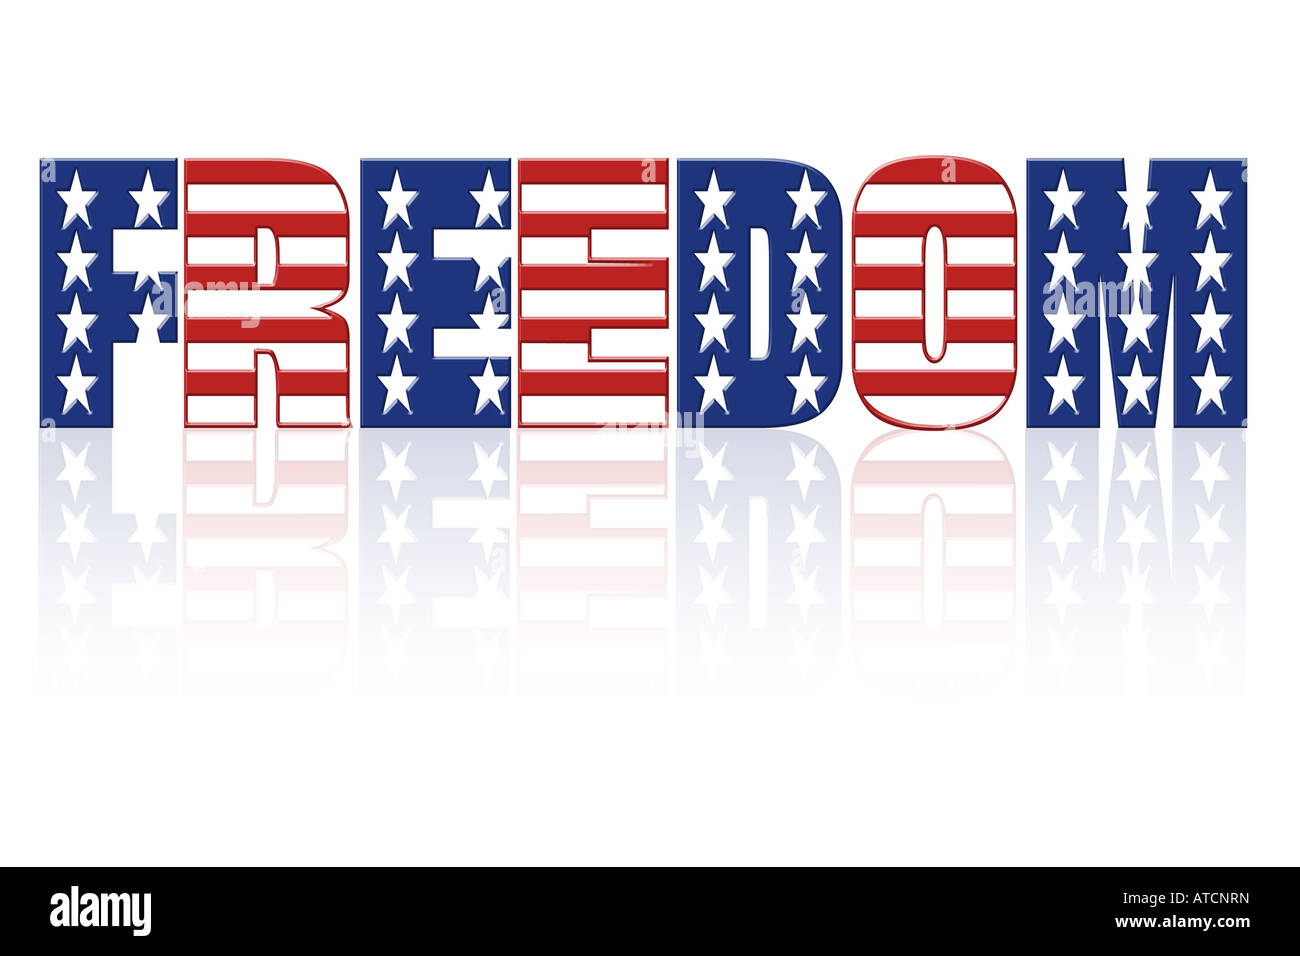 Freedom word with superimposed american flag star and stripe pattern Stock Photo